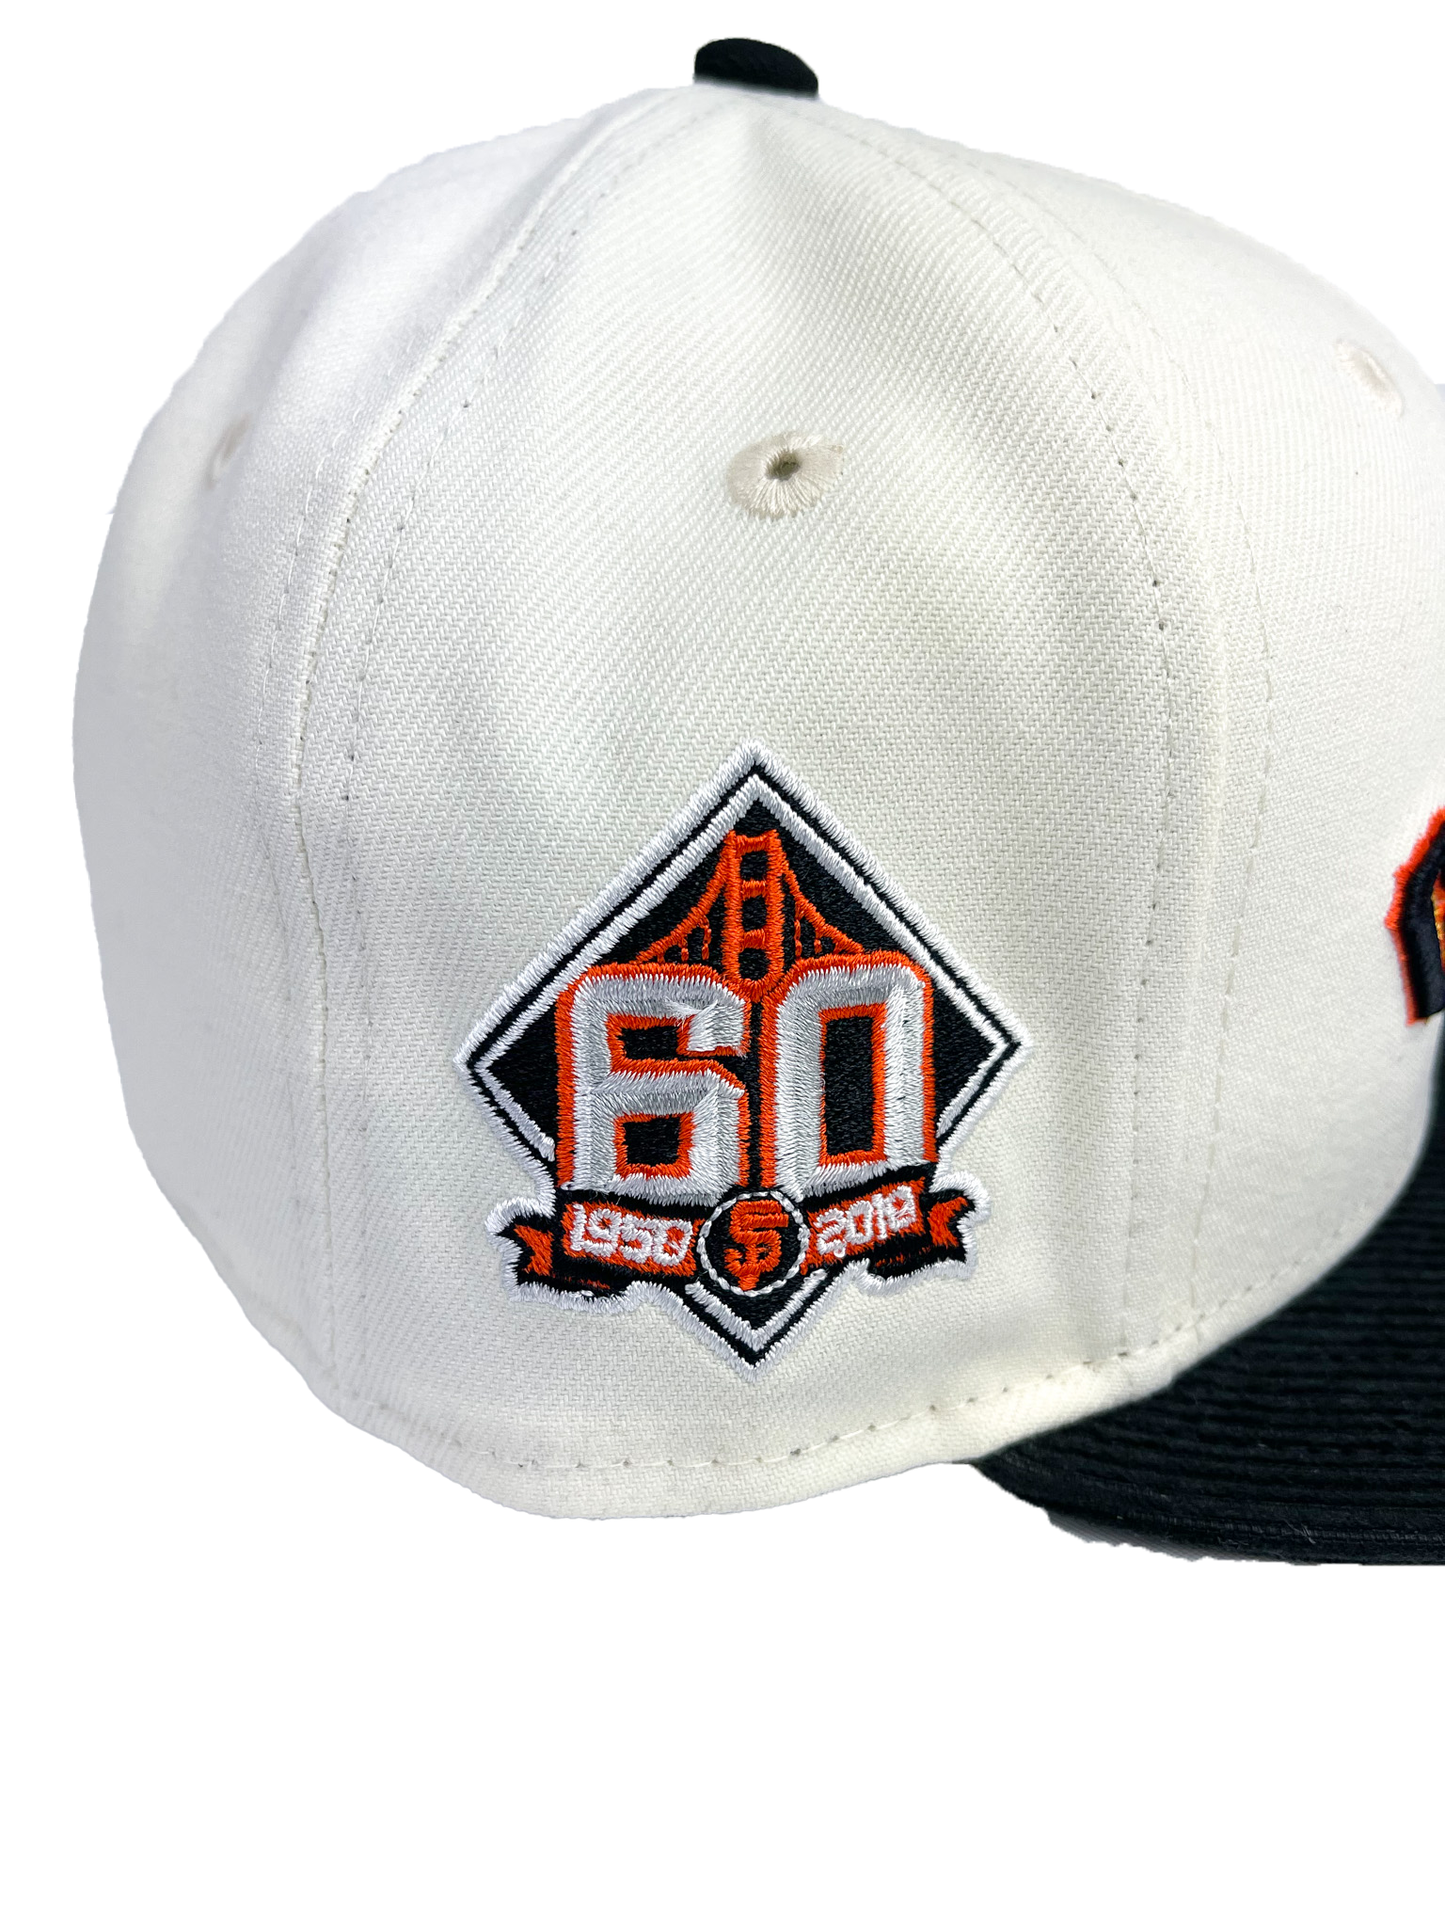 New Era San Francisco Giants 60th Anniversary Cord Brim 59Fifty Fitted"Gigantes"